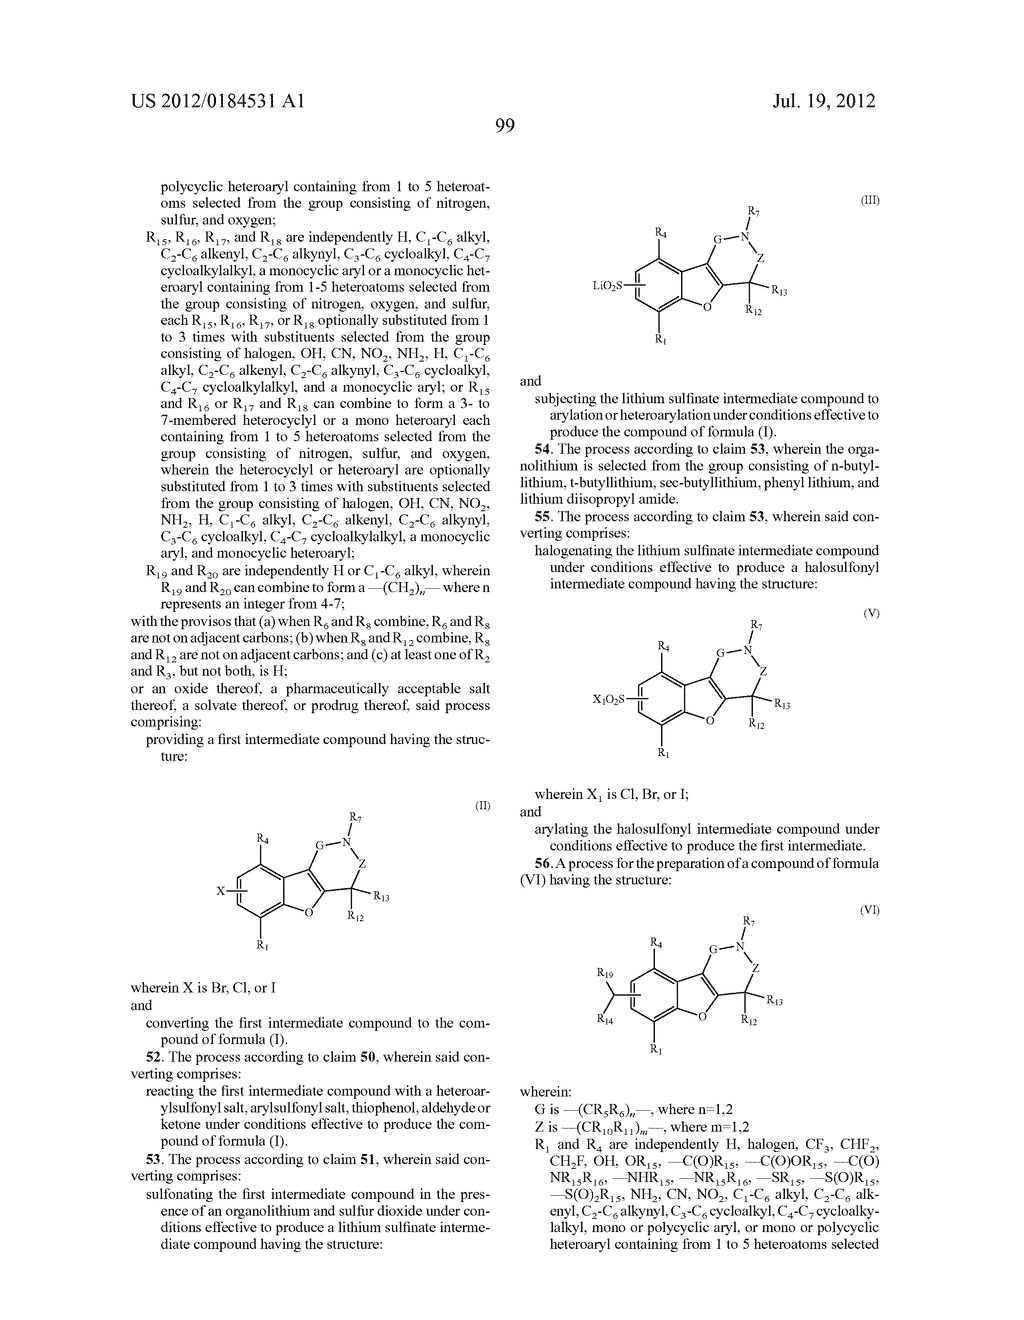 BENZOFURO[3,2-c] PYRIDINES AND RELATED ANALOGS AS SEROTONIN SUB-TYPE 6     (5-HT6) MODULATORS FOR THE TREATMENT OF OBESITY, METABOLIC SYNDROME,     COGNITION AND SCHIZOPHRENIA - diagram, schematic, and image 100